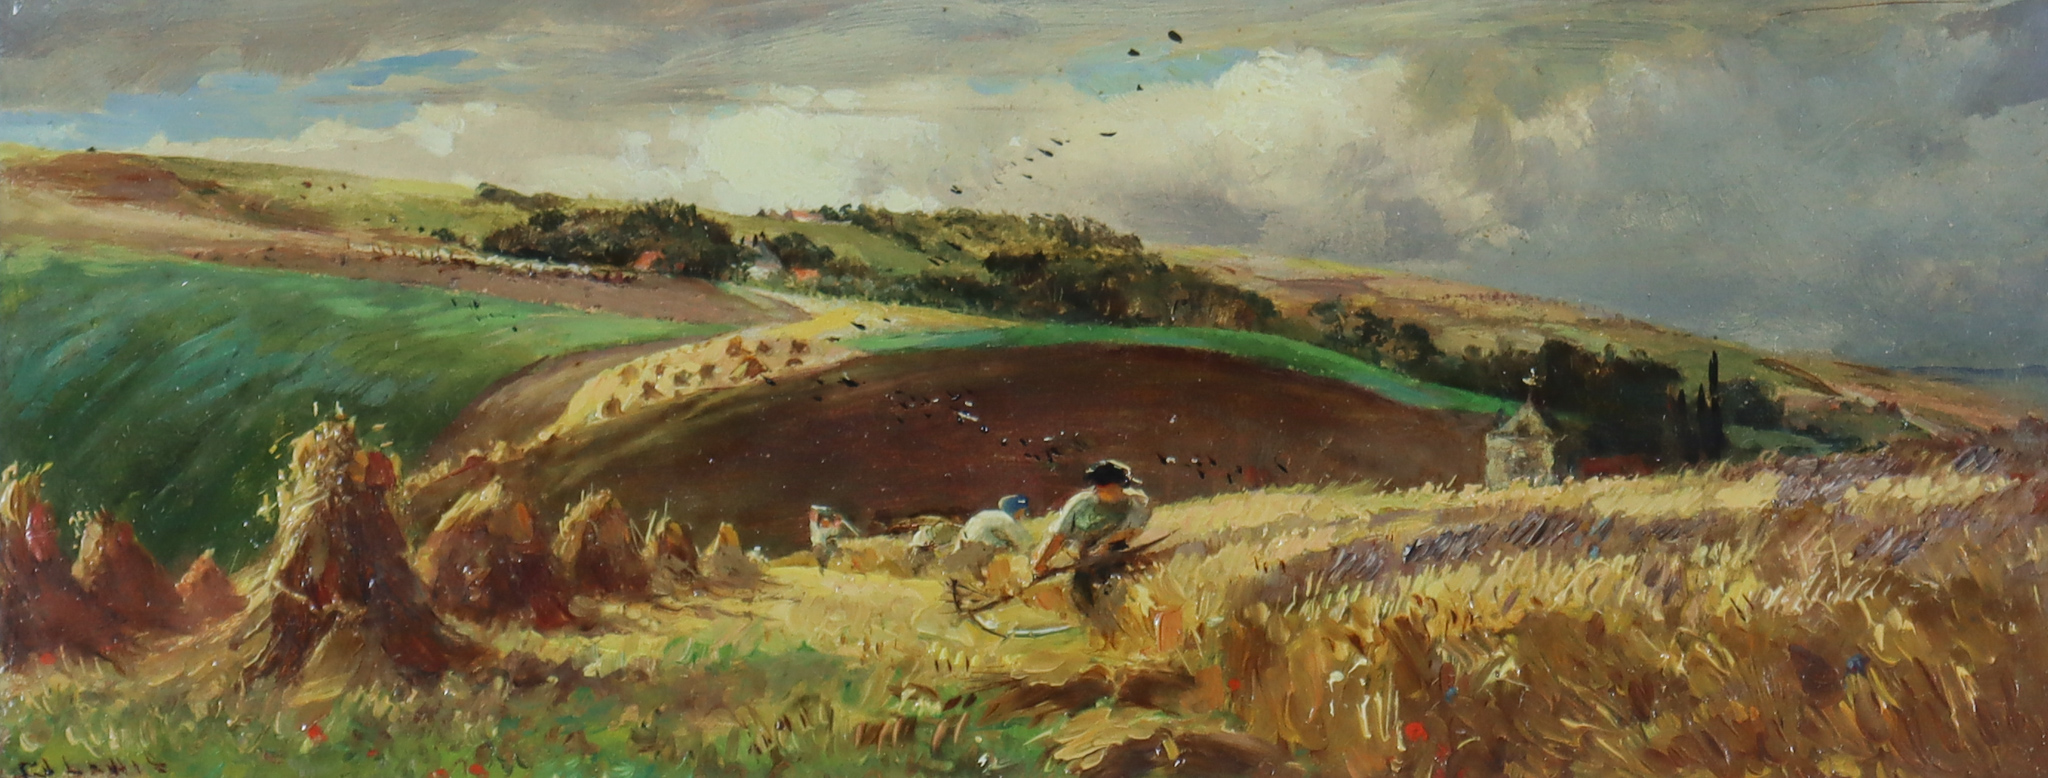 C. J. Lewis (1830/36-1892) - Two oil paintings - Harvesting the corn, board 3.75ins x 9.5ins, and